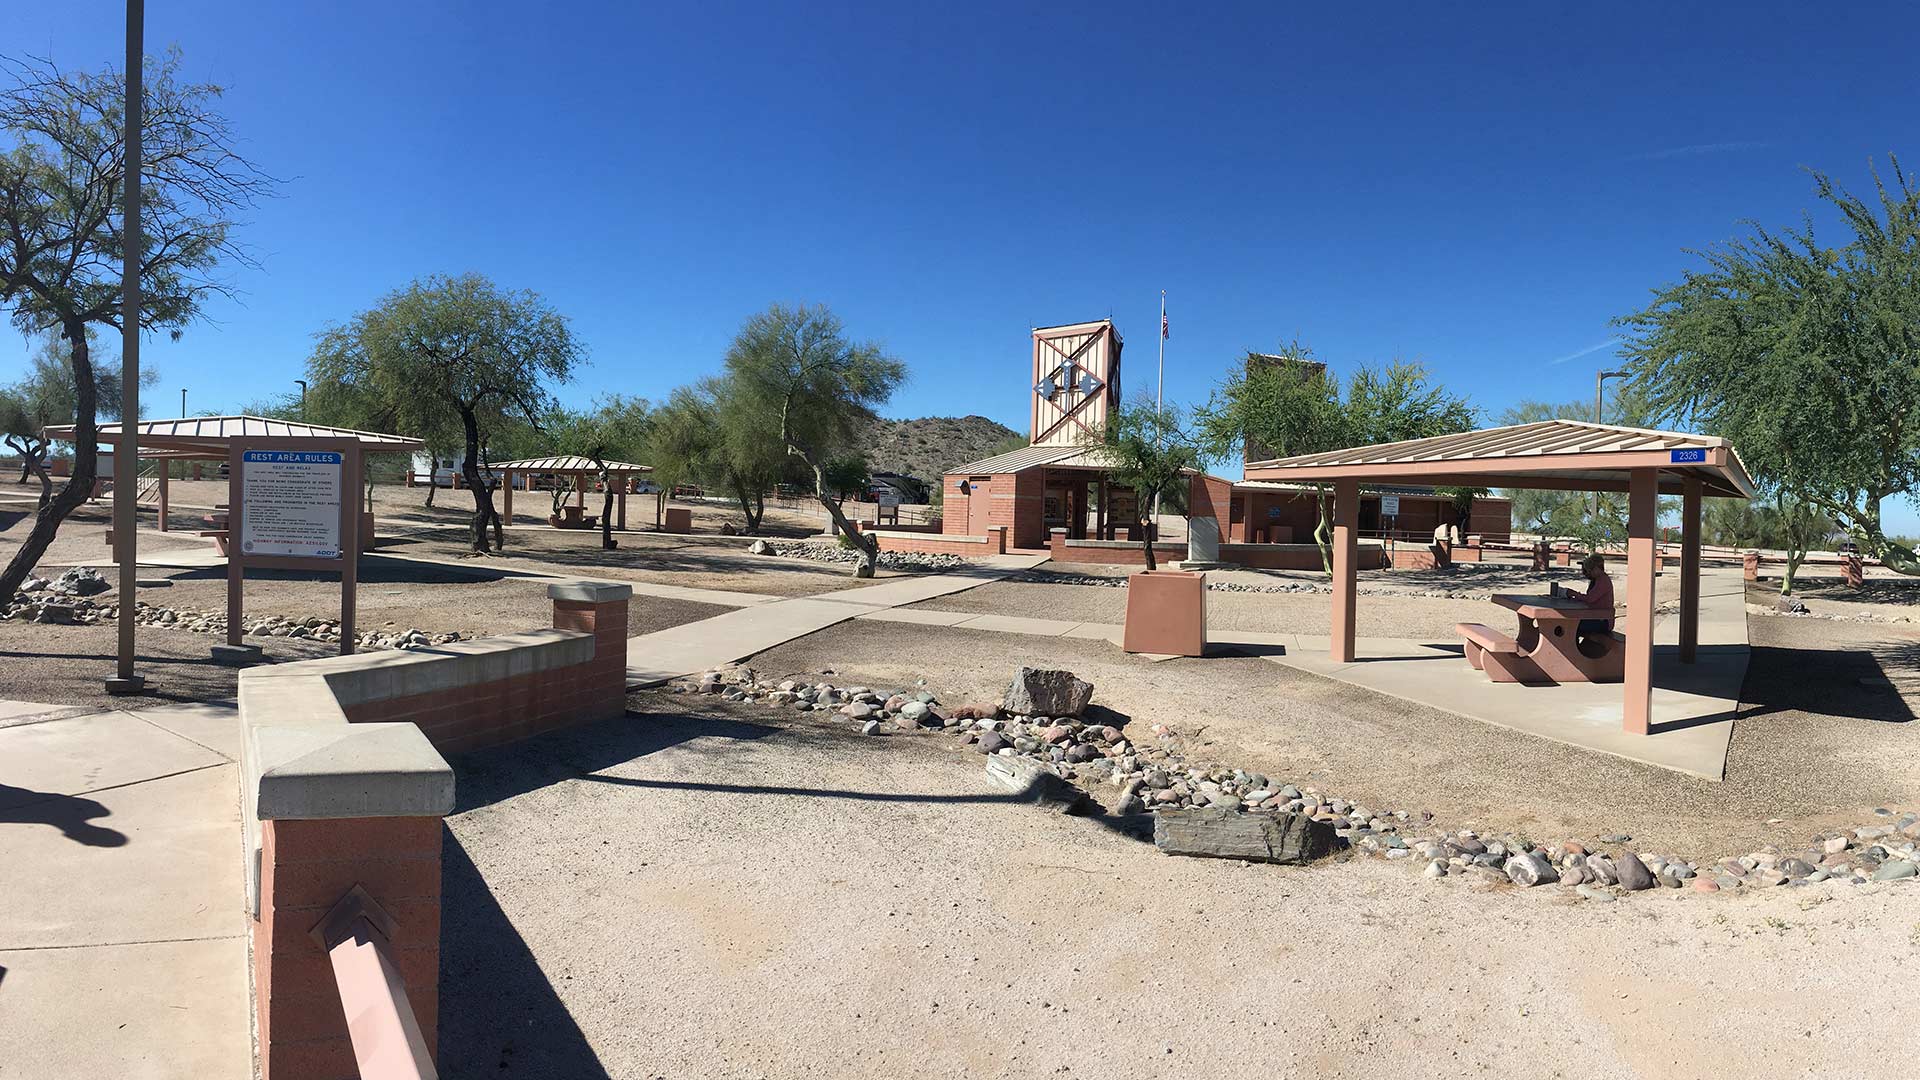 The I-10 Sacaton rest area reopened after 10 months of renovations.